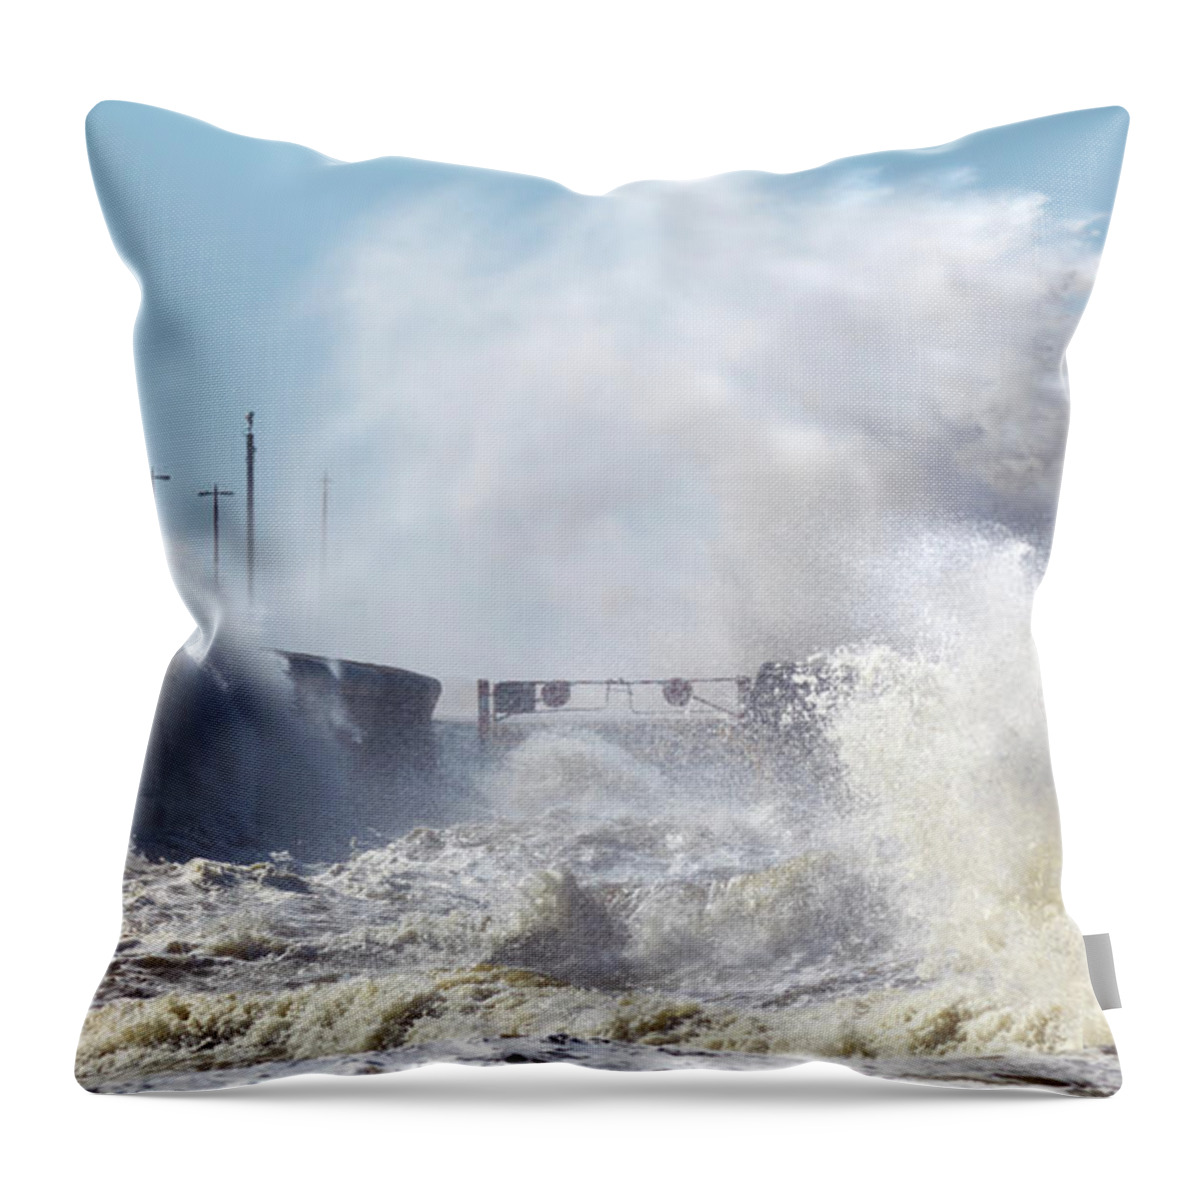 Water's Edge Throw Pillow featuring the photograph Waves Crashing Onto Seafront In Stormy by Elgol